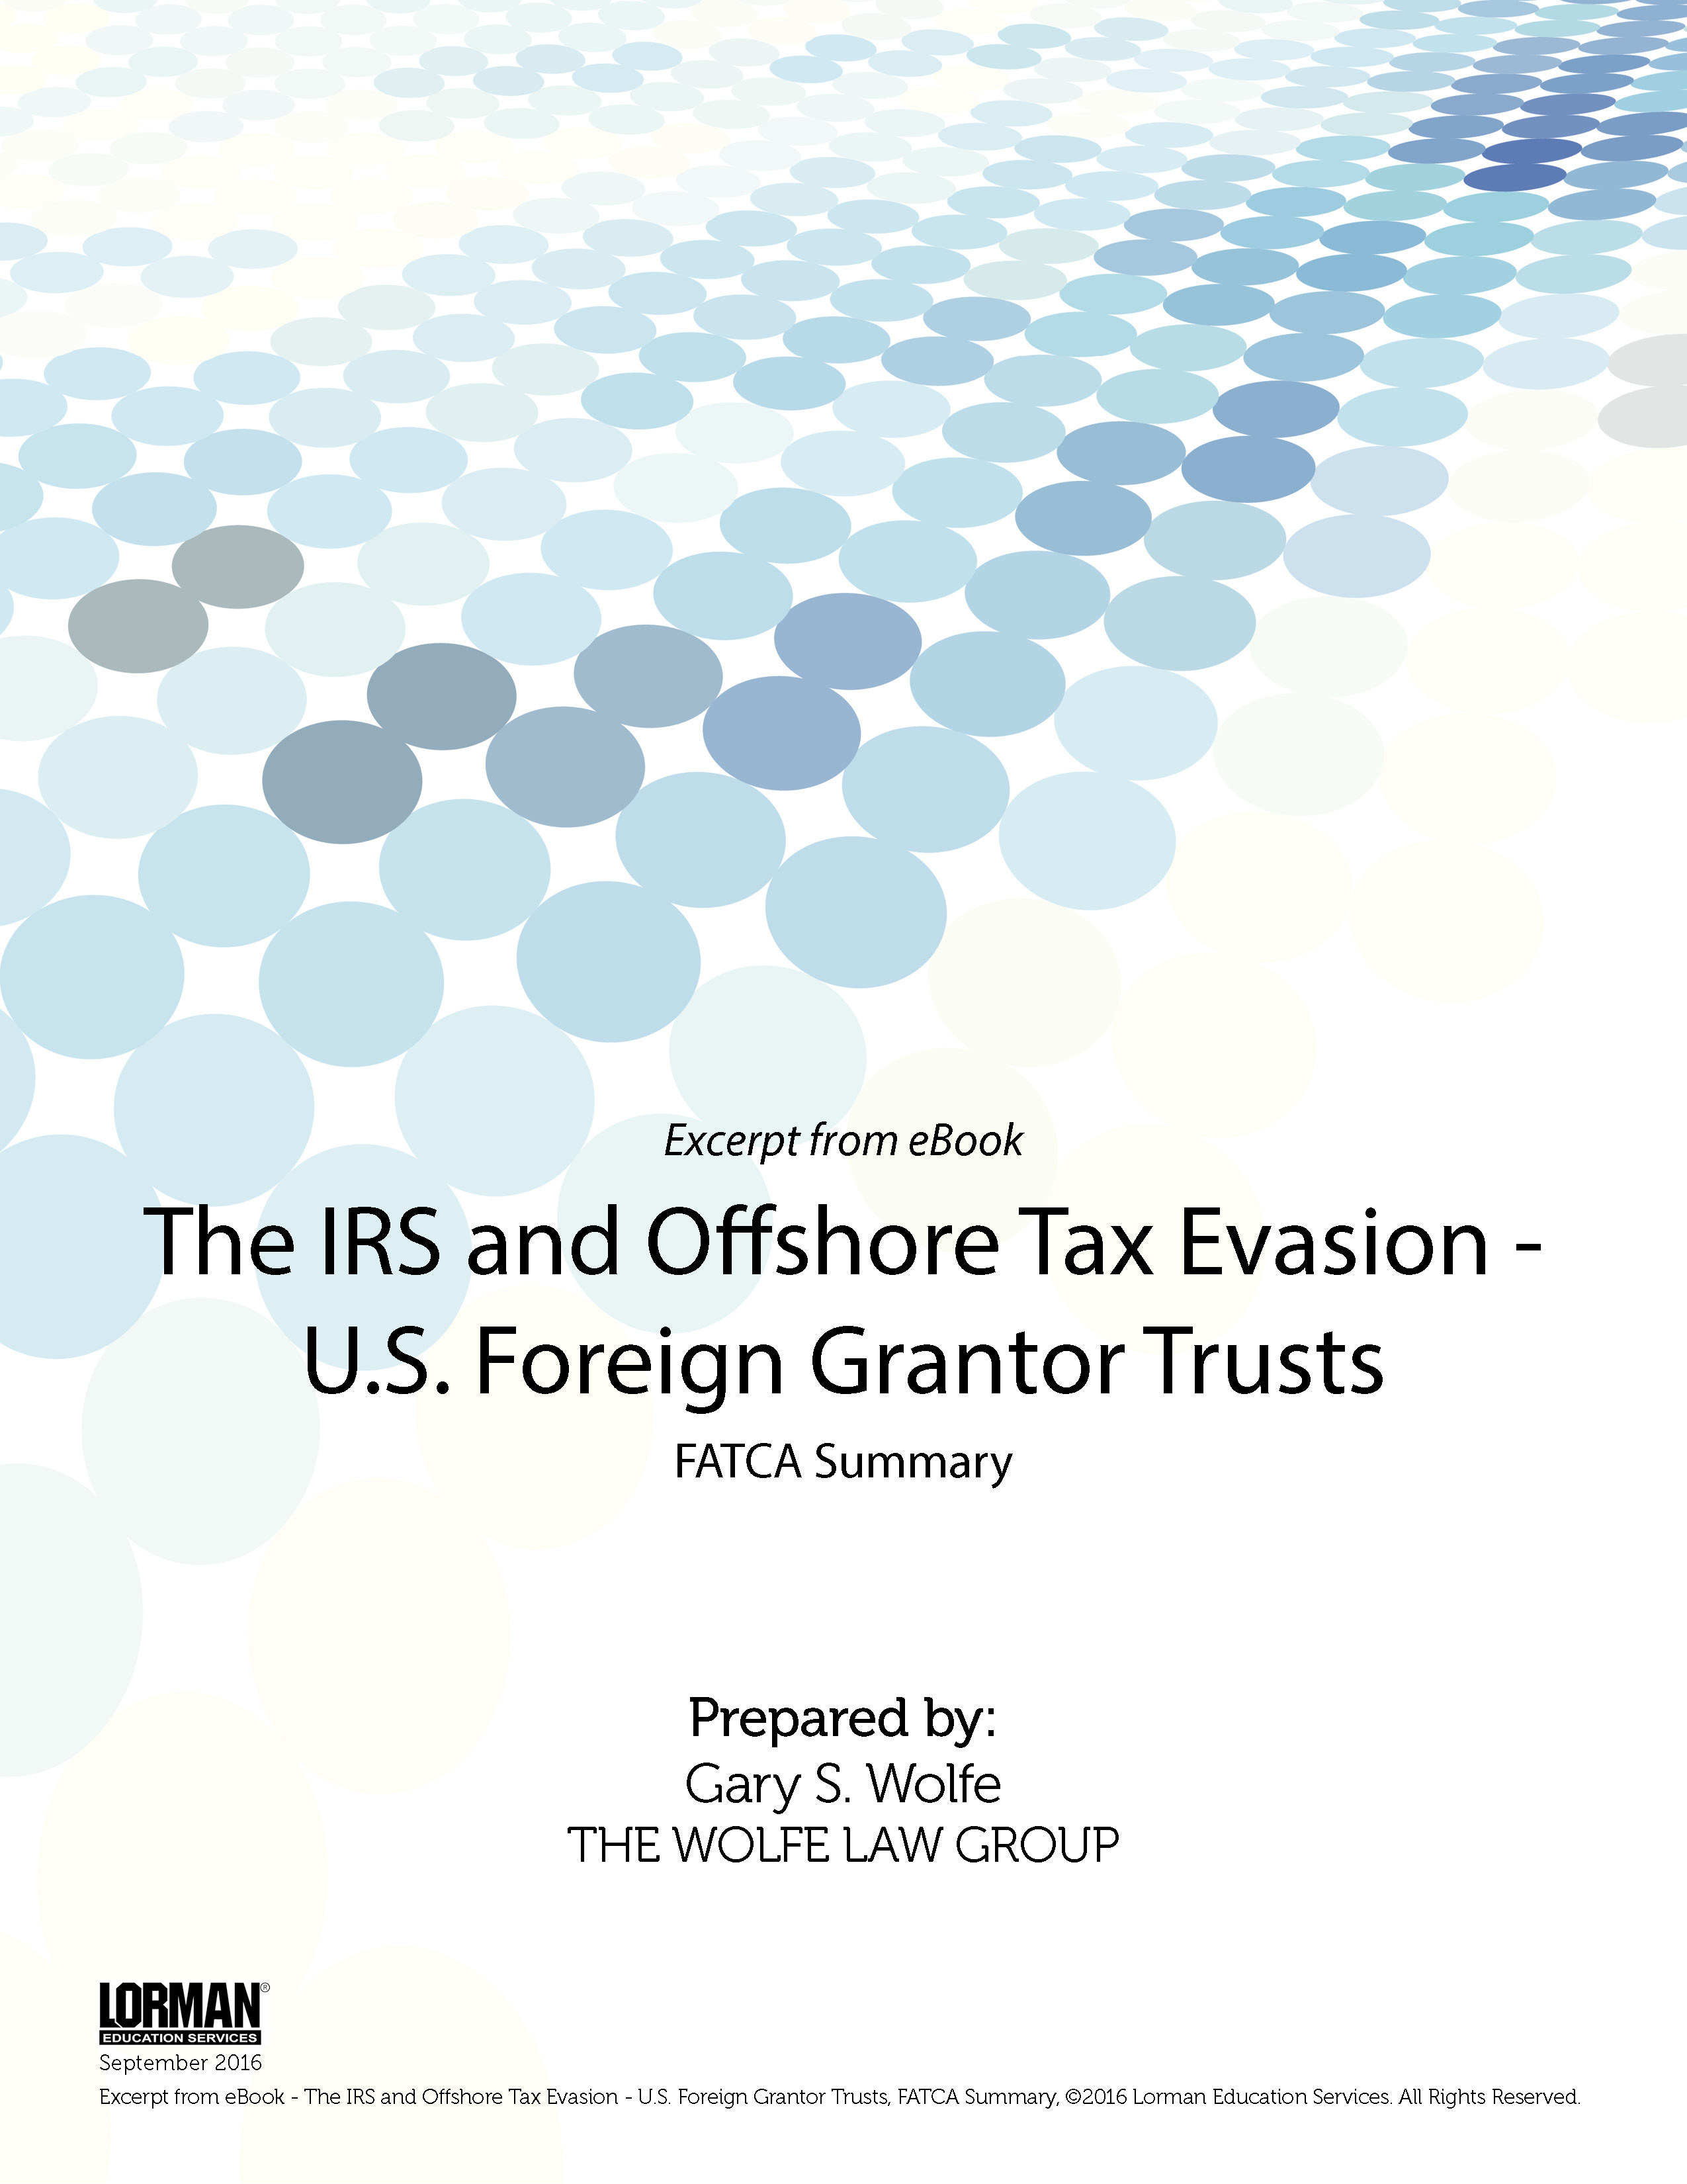 The IRS and Offshore Tax Evasion - U.S. Foreign Grantor Trusts: FATCA Summary